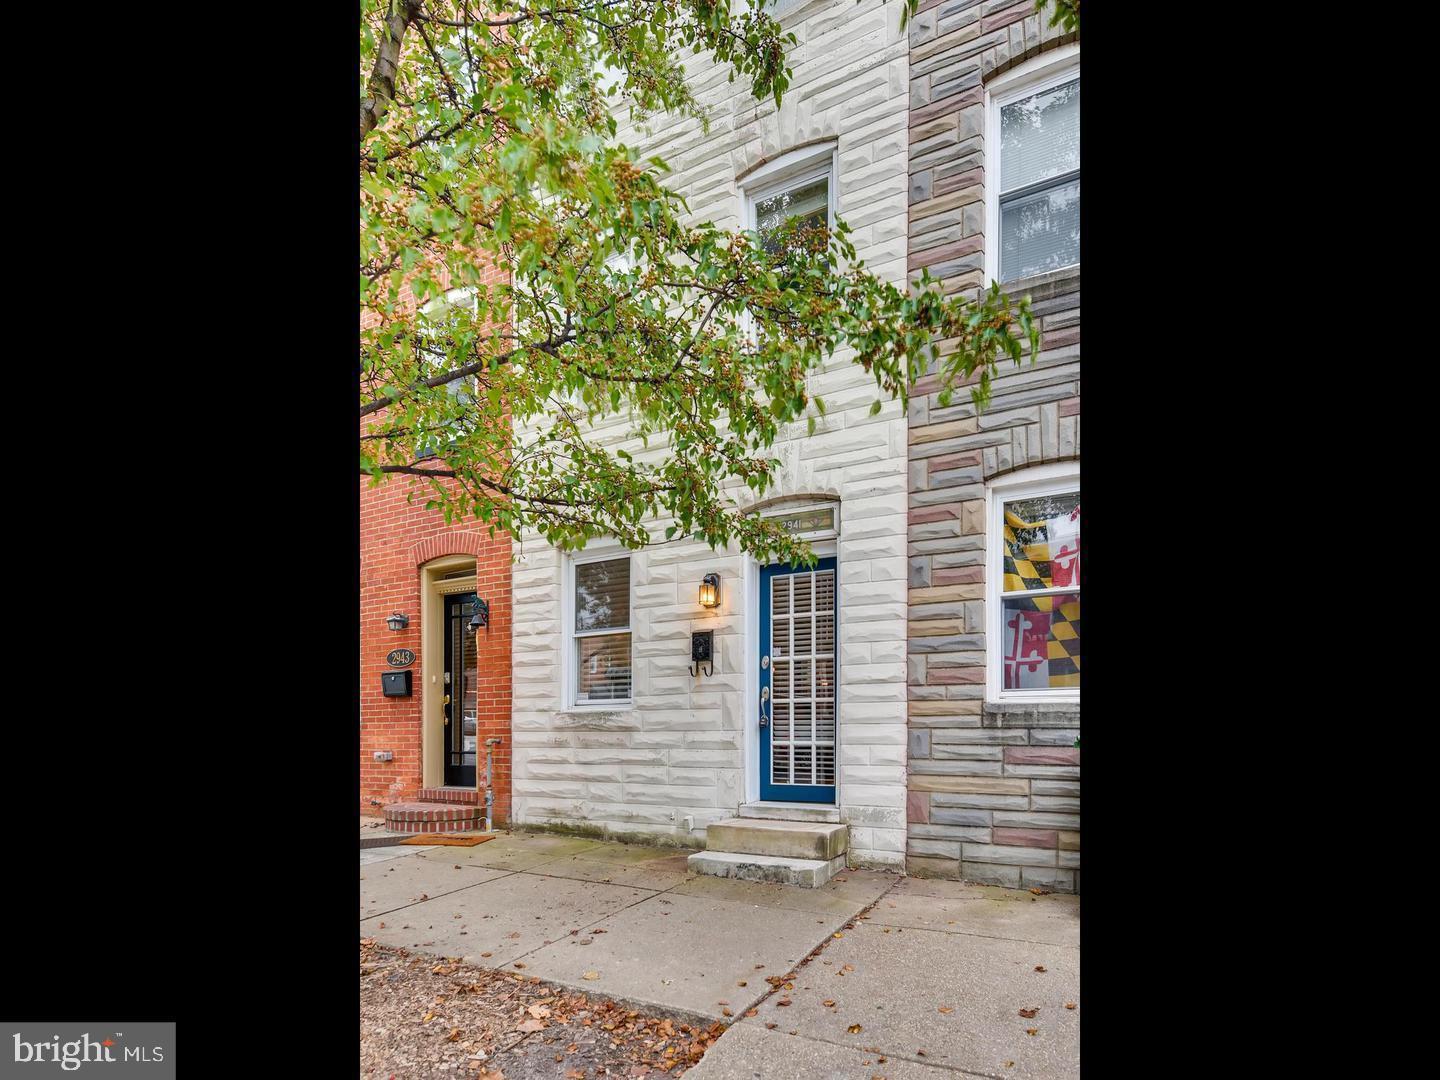 View Baltimore, MD 21224 townhome